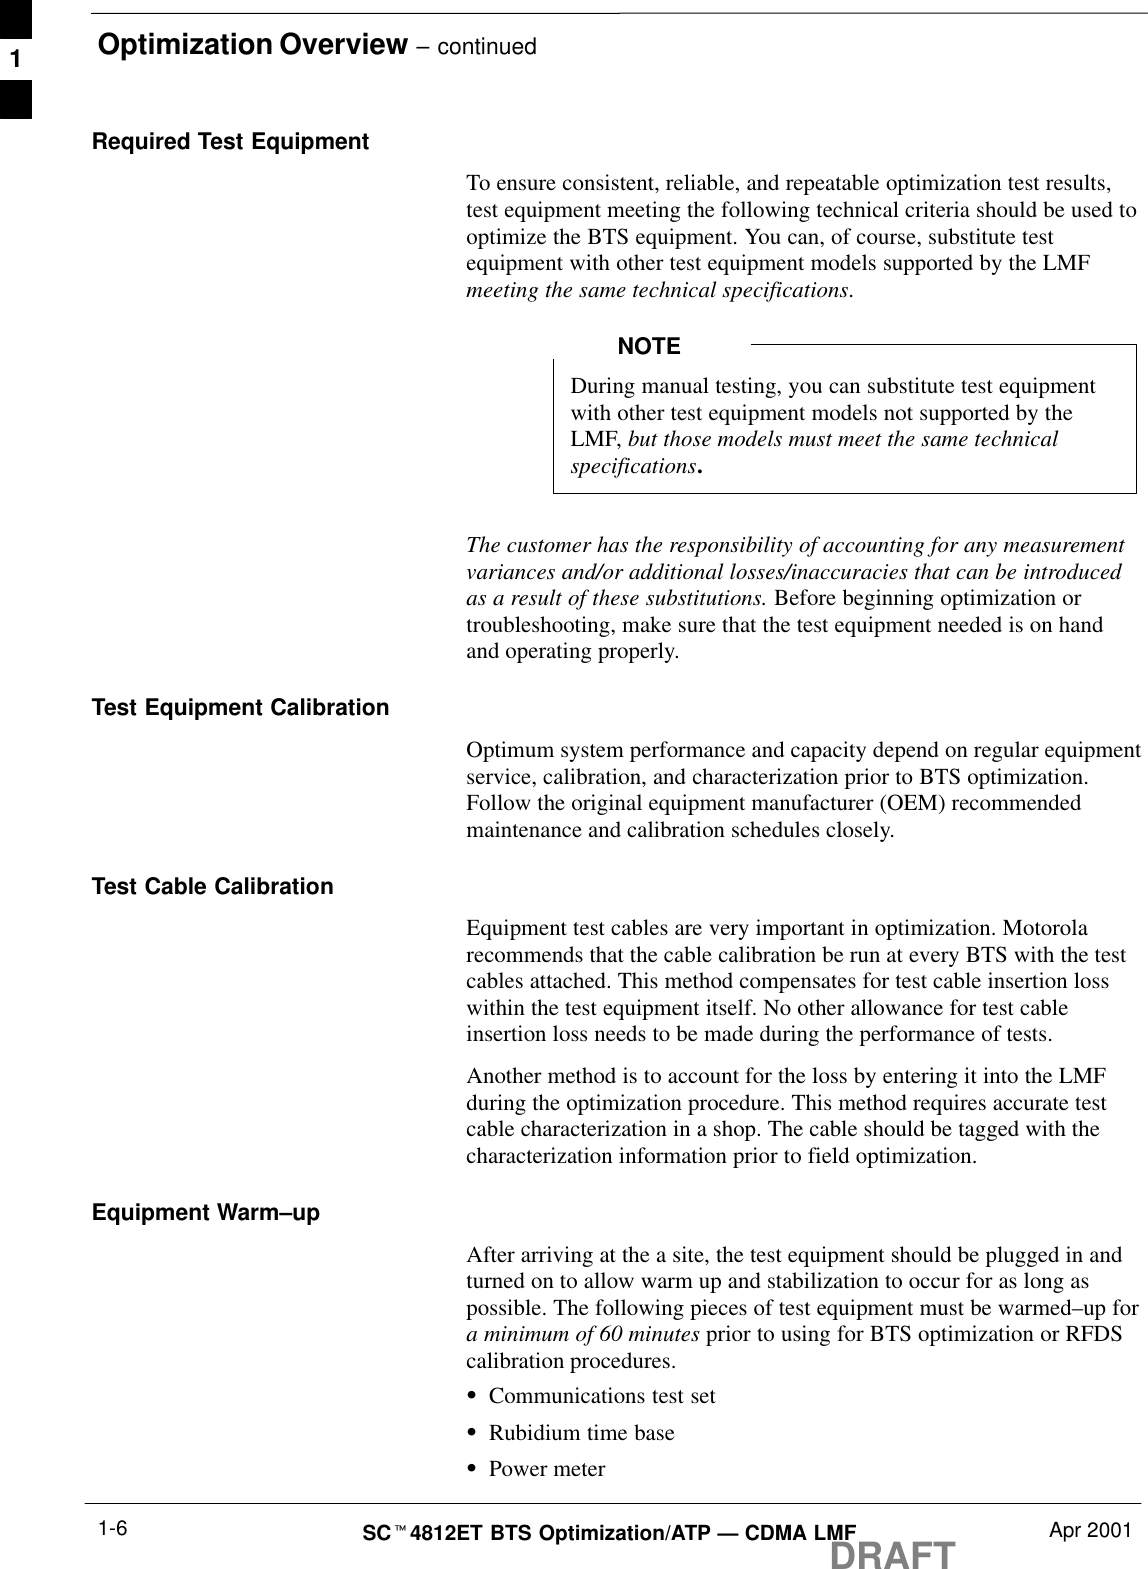 Optimization Overview – continuedDRAFTSCt4812ET BTS Optimization/ATP — CDMA LMF Apr 20011-6Required Test EquipmentTo ensure consistent, reliable, and repeatable optimization test results,test equipment meeting the following technical criteria should be used tooptimize the BTS equipment. You can, of course, substitute testequipment with other test equipment models supported by the LMFmeeting the same technical specifications.During manual testing, you can substitute test equipmentwith other test equipment models not supported by theLMF, but those models must meet the same technicalspecifications.NOTEThe customer has the responsibility of accounting for any measurementvariances and/or additional losses/inaccuracies that can be introducedas a result of these substitutions. Before beginning optimization ortroubleshooting, make sure that the test equipment needed is on handand operating properly.Test Equipment CalibrationOptimum system performance and capacity depend on regular equipmentservice, calibration, and characterization prior to BTS optimization.Follow the original equipment manufacturer (OEM) recommendedmaintenance and calibration schedules closely.Test Cable CalibrationEquipment test cables are very important in optimization. Motorolarecommends that the cable calibration be run at every BTS with the testcables attached. This method compensates for test cable insertion losswithin the test equipment itself. No other allowance for test cableinsertion loss needs to be made during the performance of tests.Another method is to account for the loss by entering it into the LMFduring the optimization procedure. This method requires accurate testcable characterization in a shop. The cable should be tagged with thecharacterization information prior to field optimization.Equipment Warm–upAfter arriving at the a site, the test equipment should be plugged in andturned on to allow warm up and stabilization to occur for as long aspossible. The following pieces of test equipment must be warmed–up fora minimum of 60 minutes prior to using for BTS optimization or RFDScalibration procedures.SCommunications test setSRubidium time baseSPower meter1